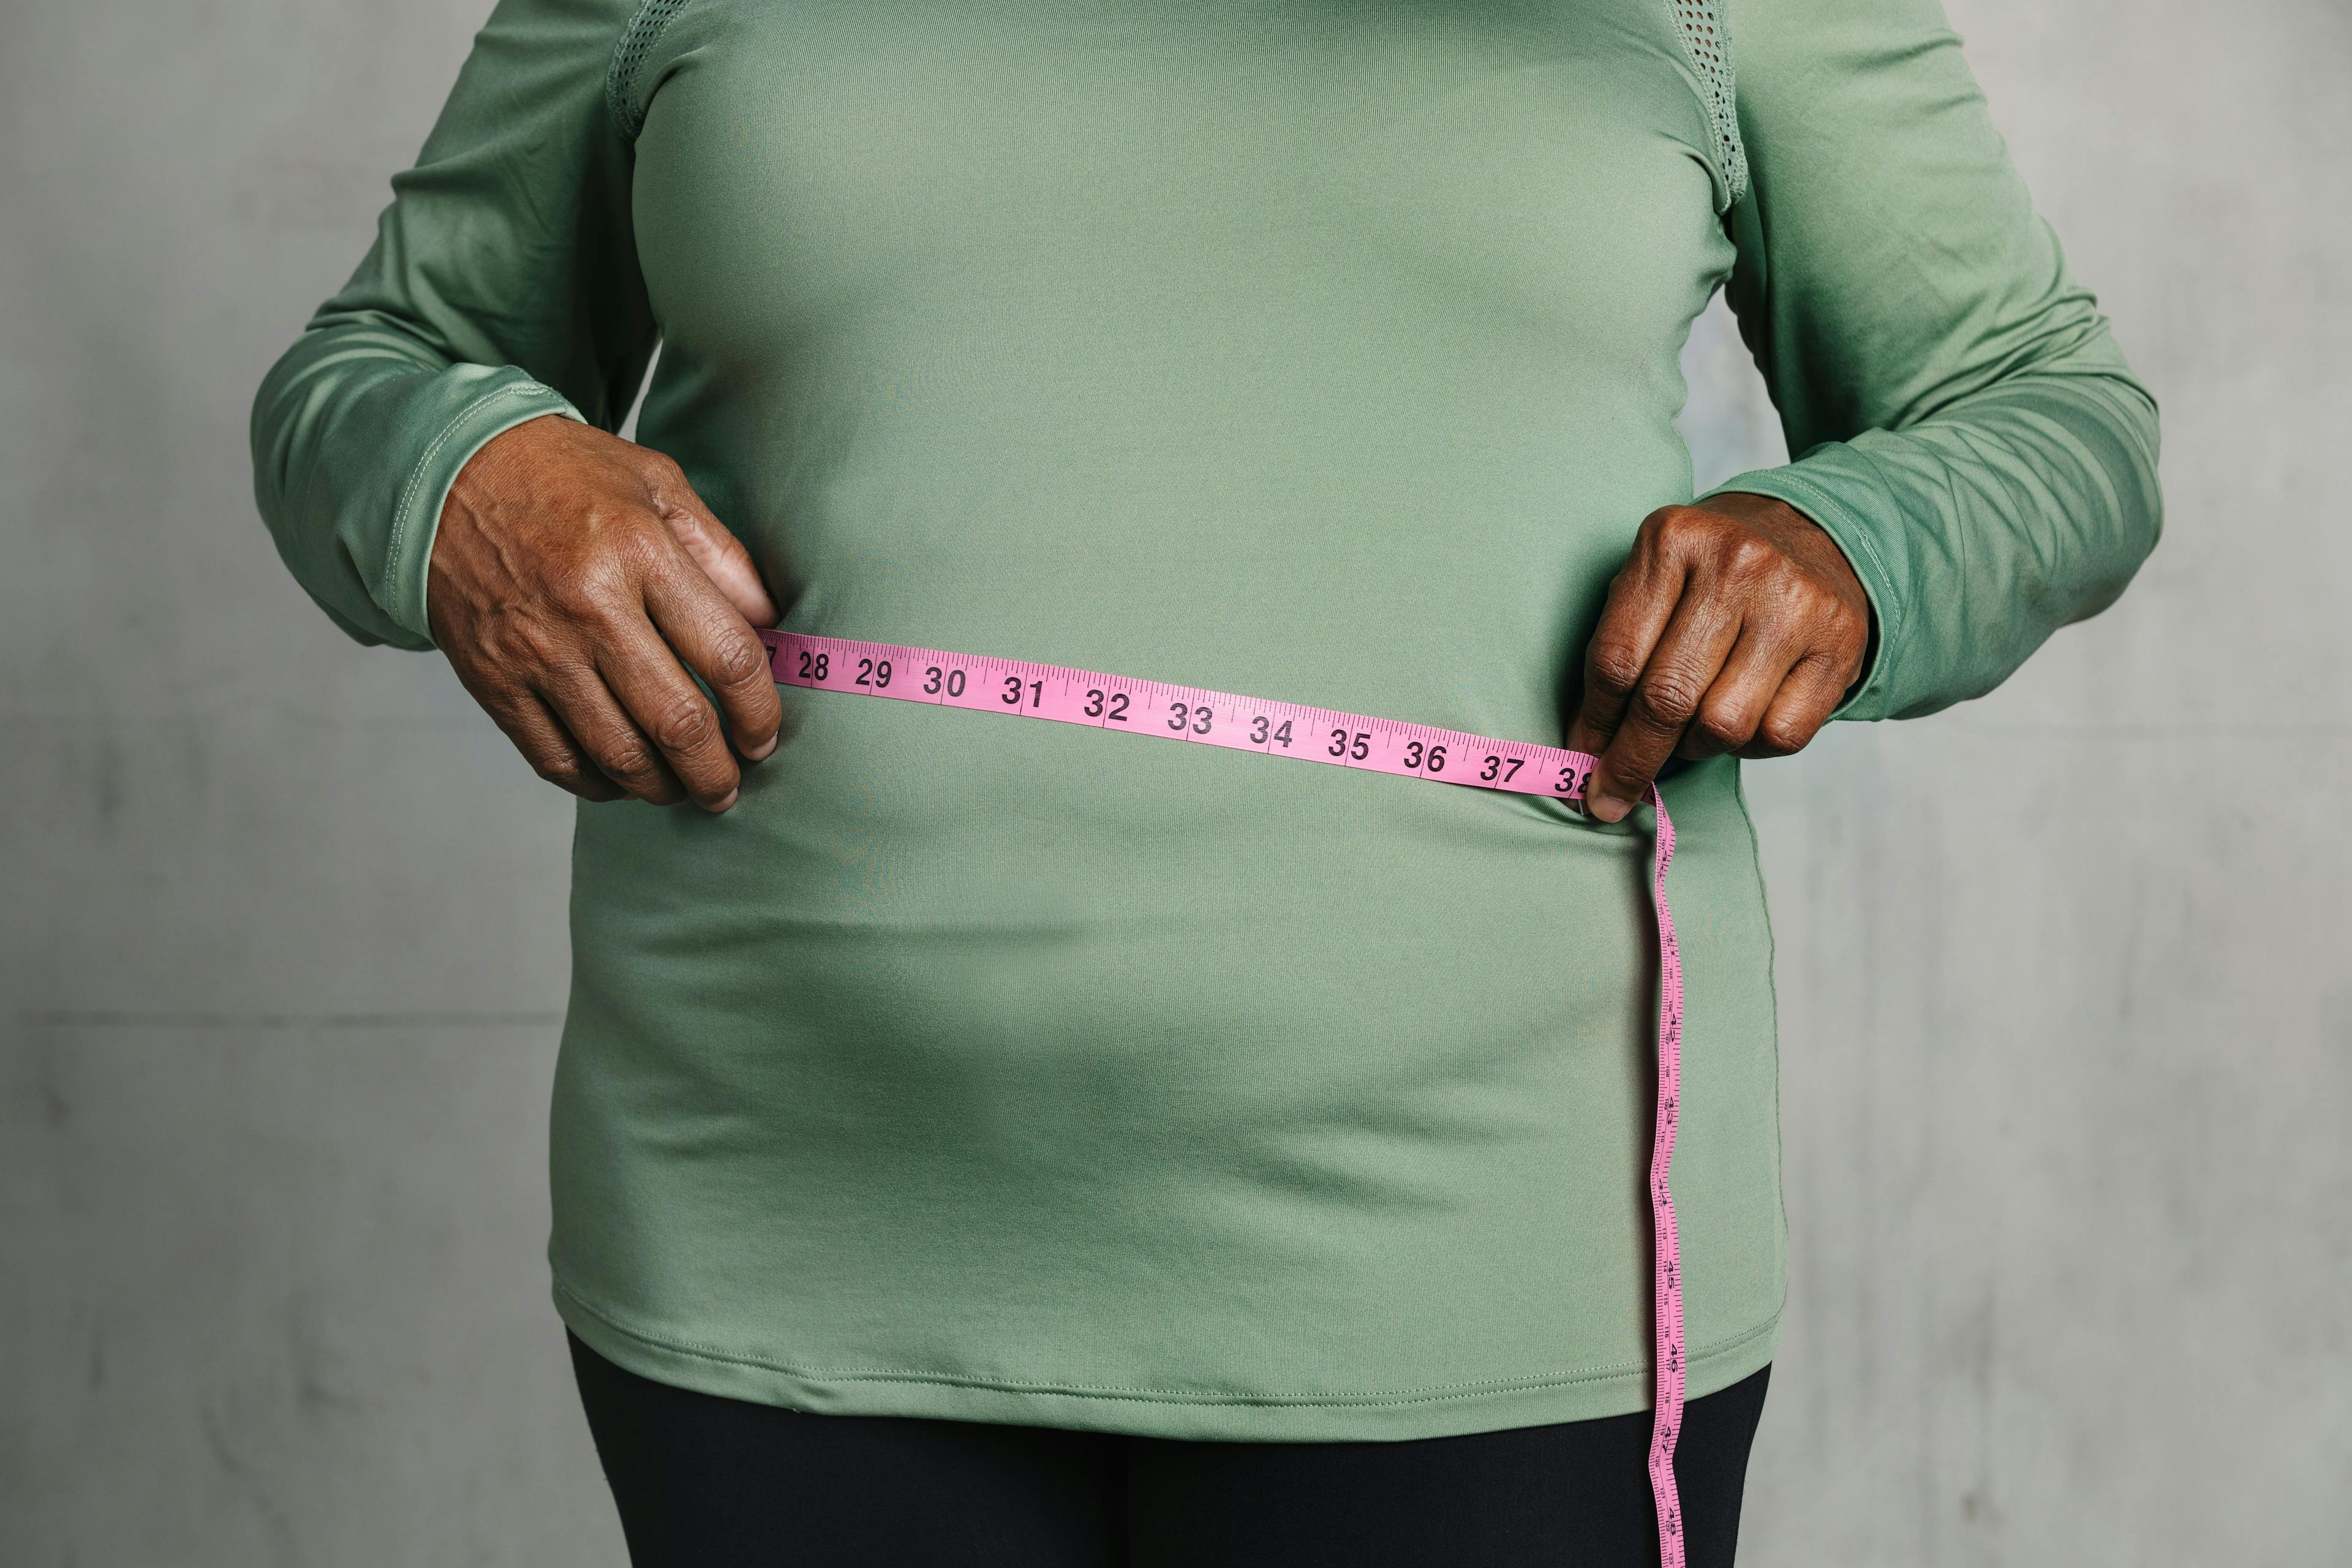 Maternal obesity and excessive weight gain increase ADHD risk in offspring